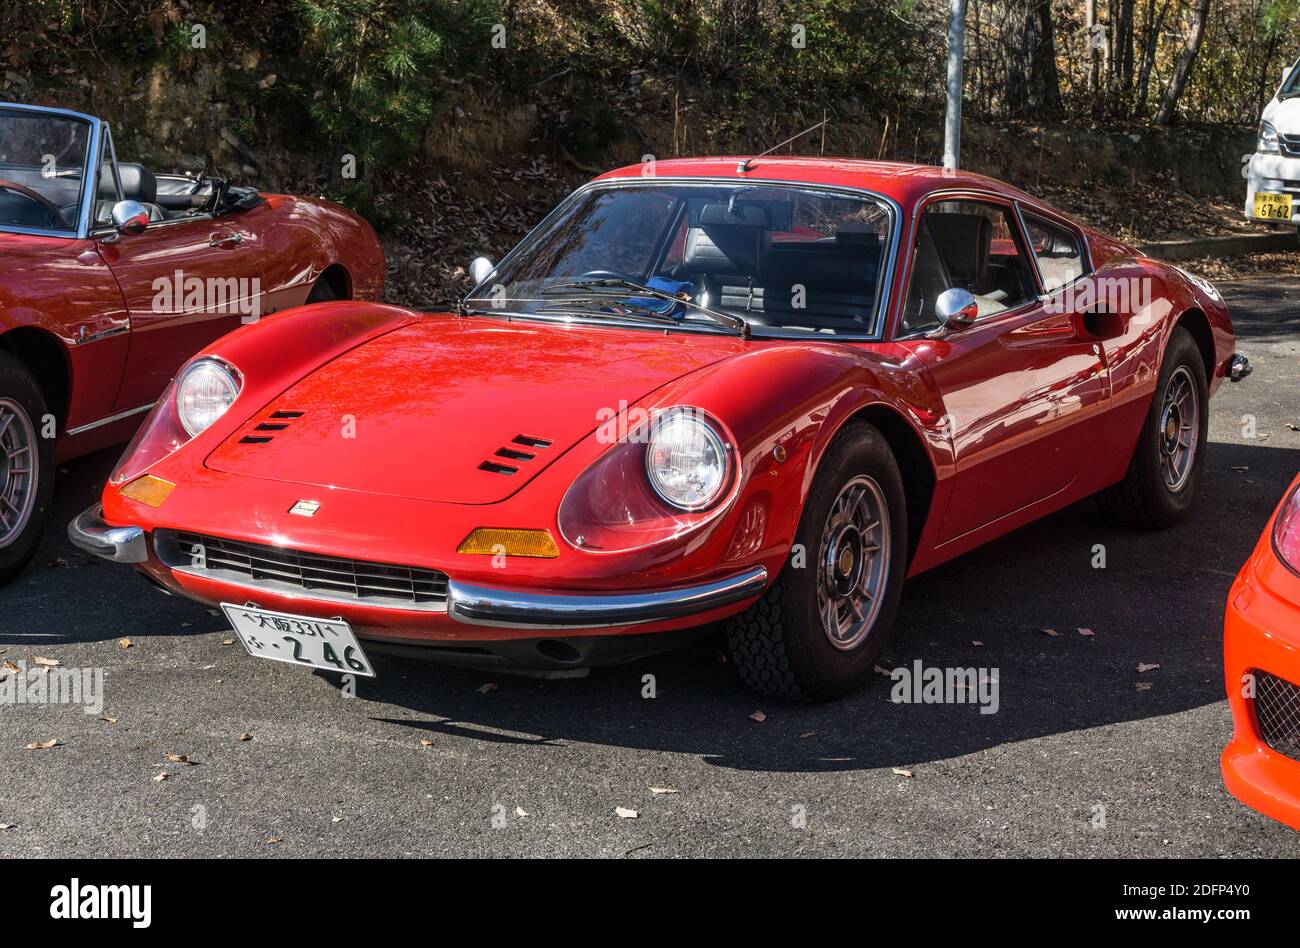 A red 1970s Ferrari Dino 246 GT small sports car parked outside in sunshine in Kyoto, Japan Stock Photo